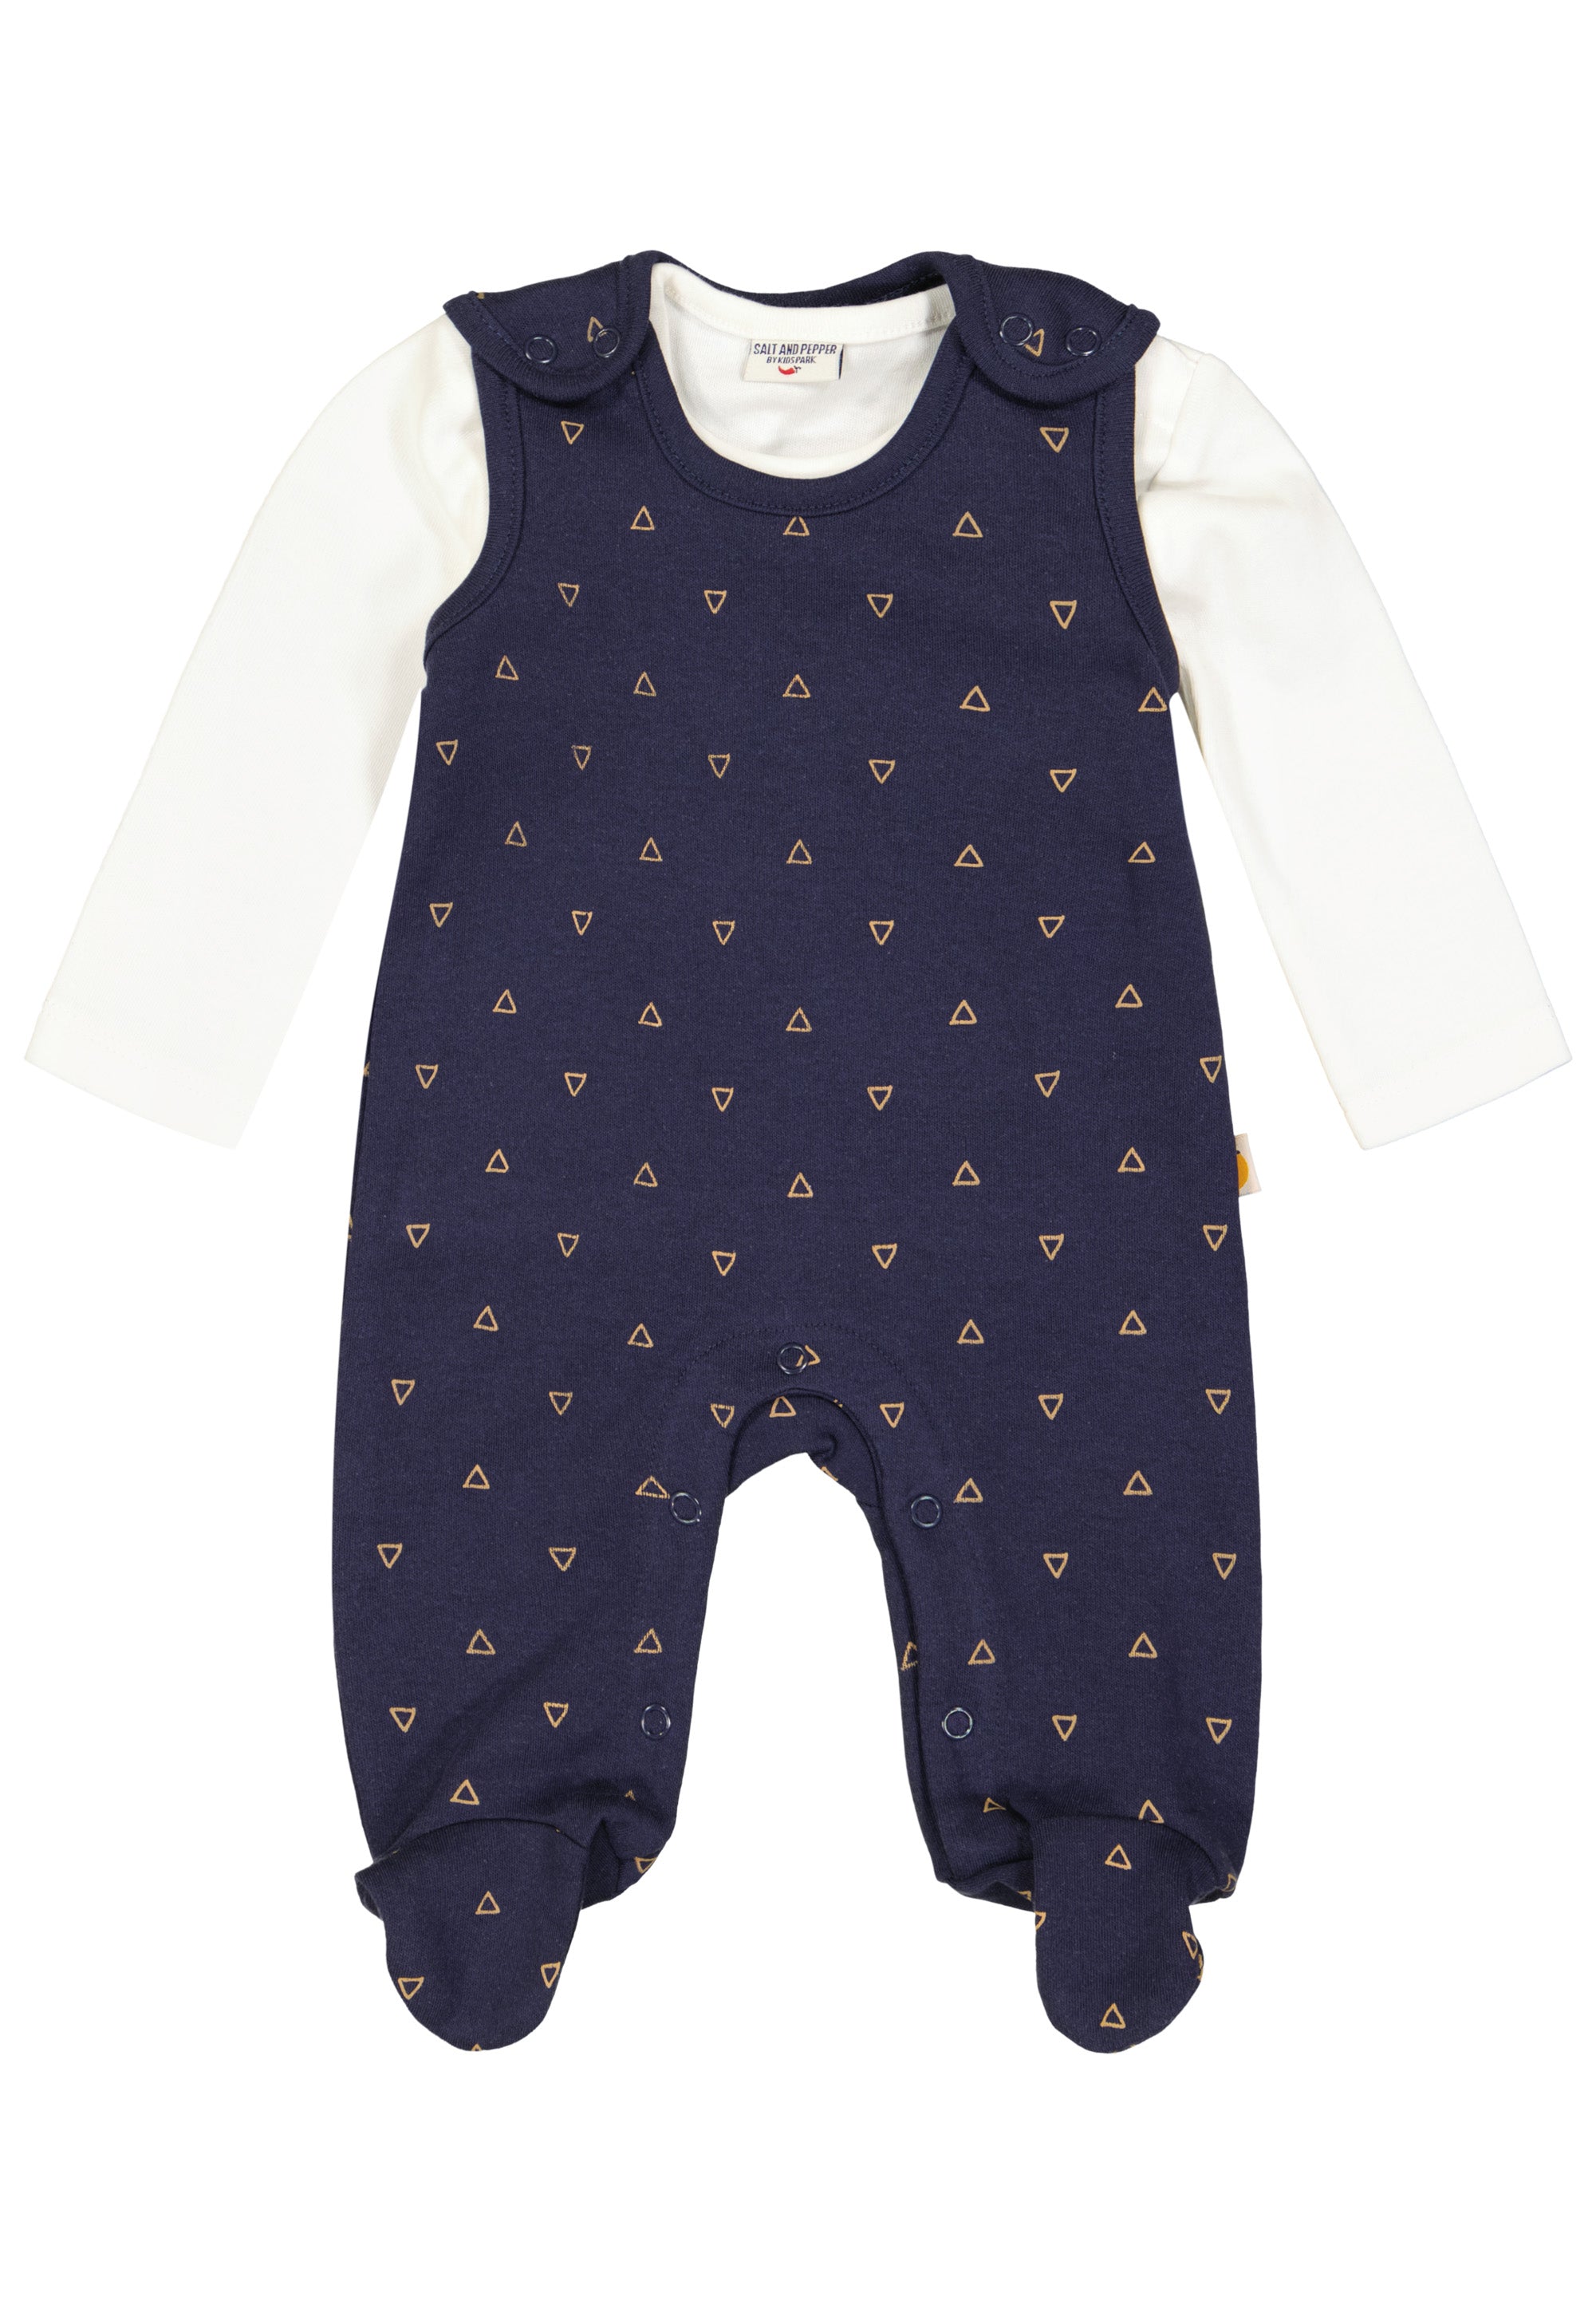 Salt and Pepper Baby Boys Playsuit Welcome AOP 25241501